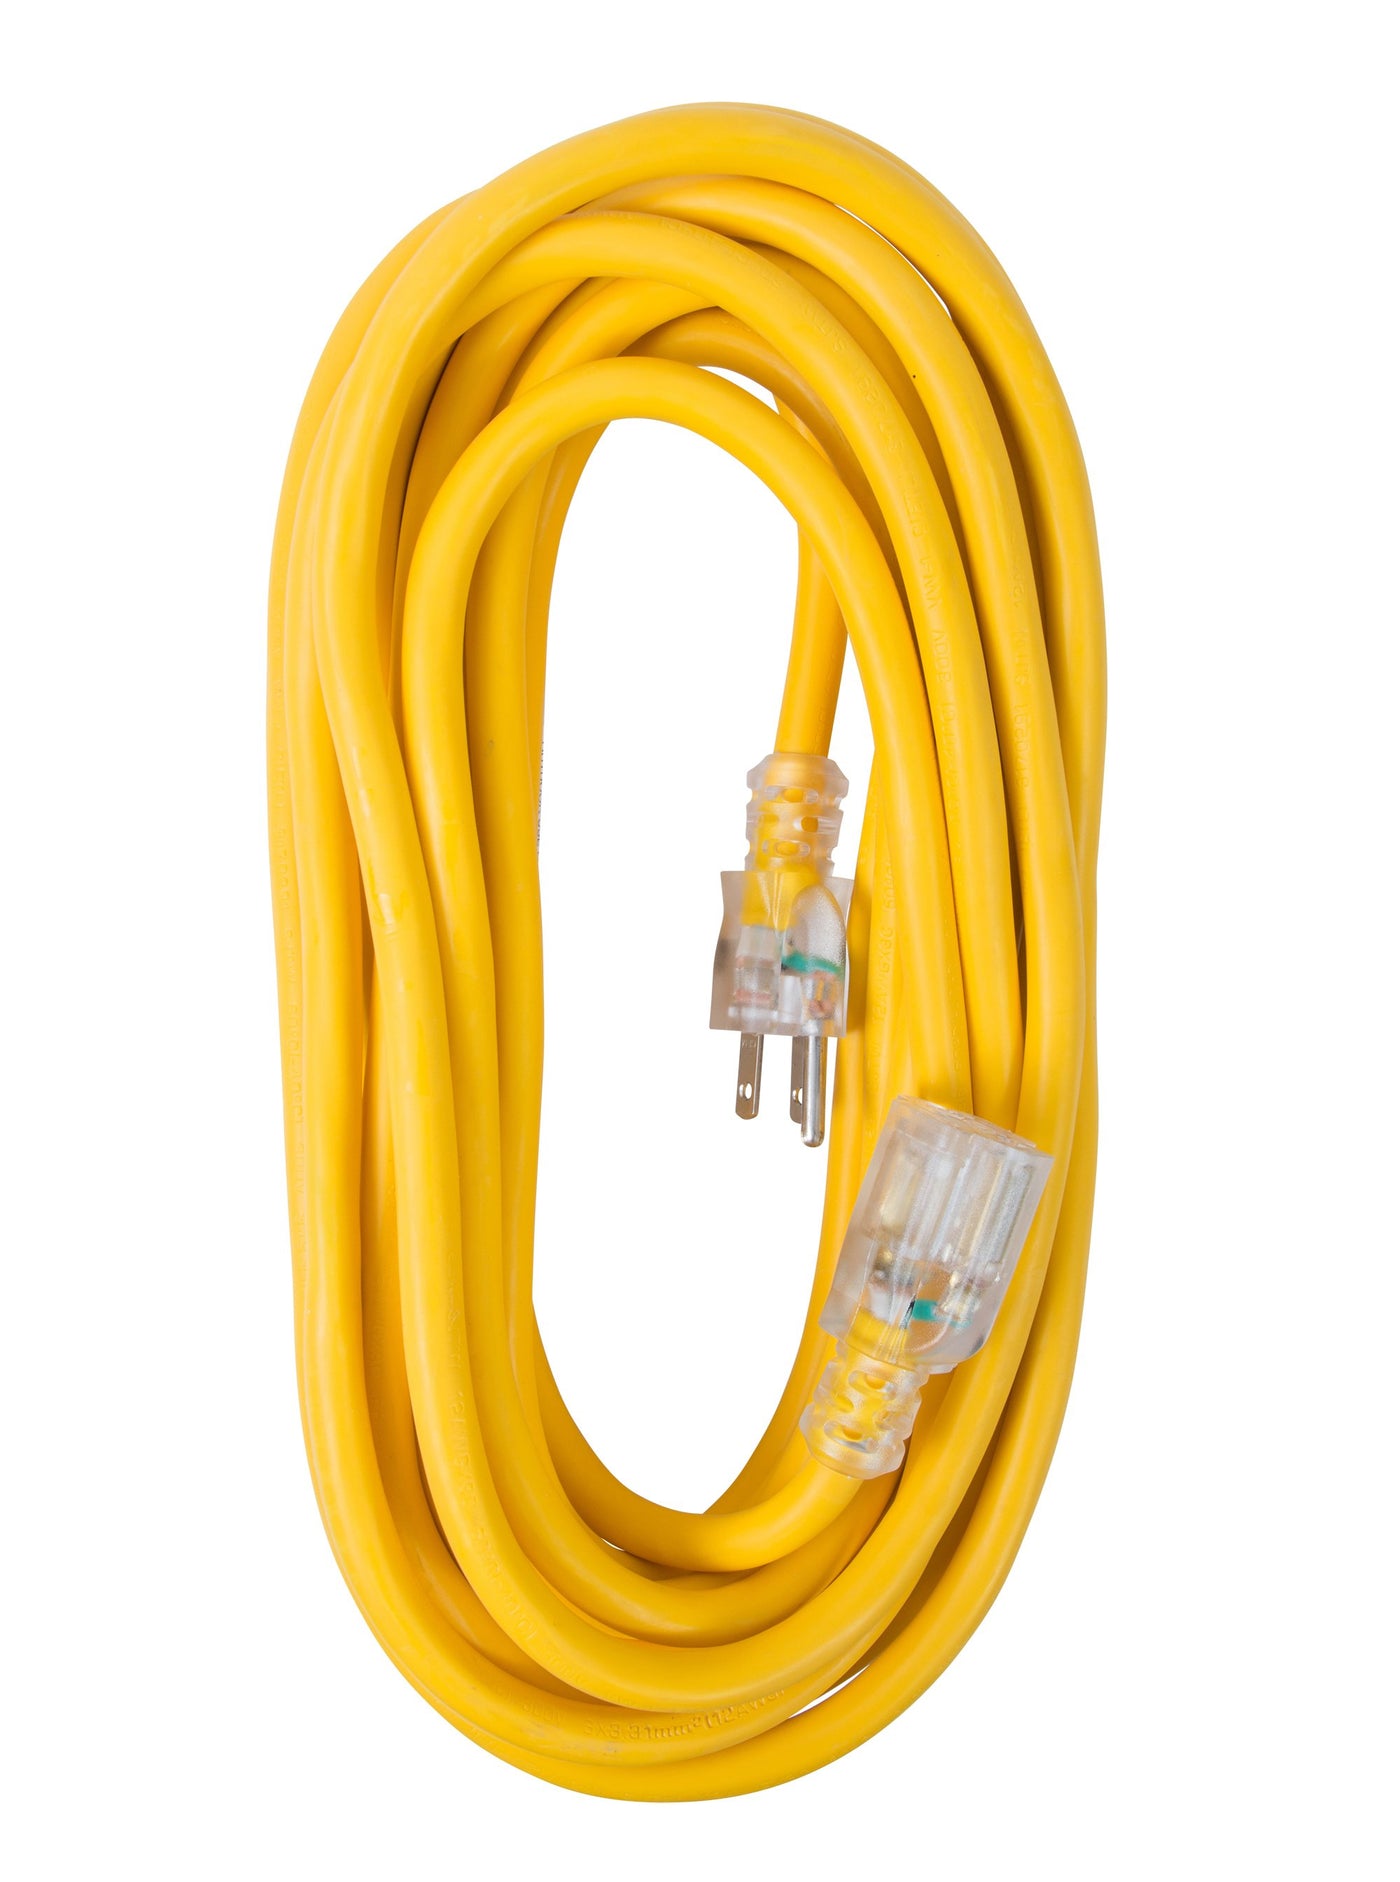 Bergen Industries OC25123LT Extension Cord 25ft  SJTW Yellow  12/3  Lighted End